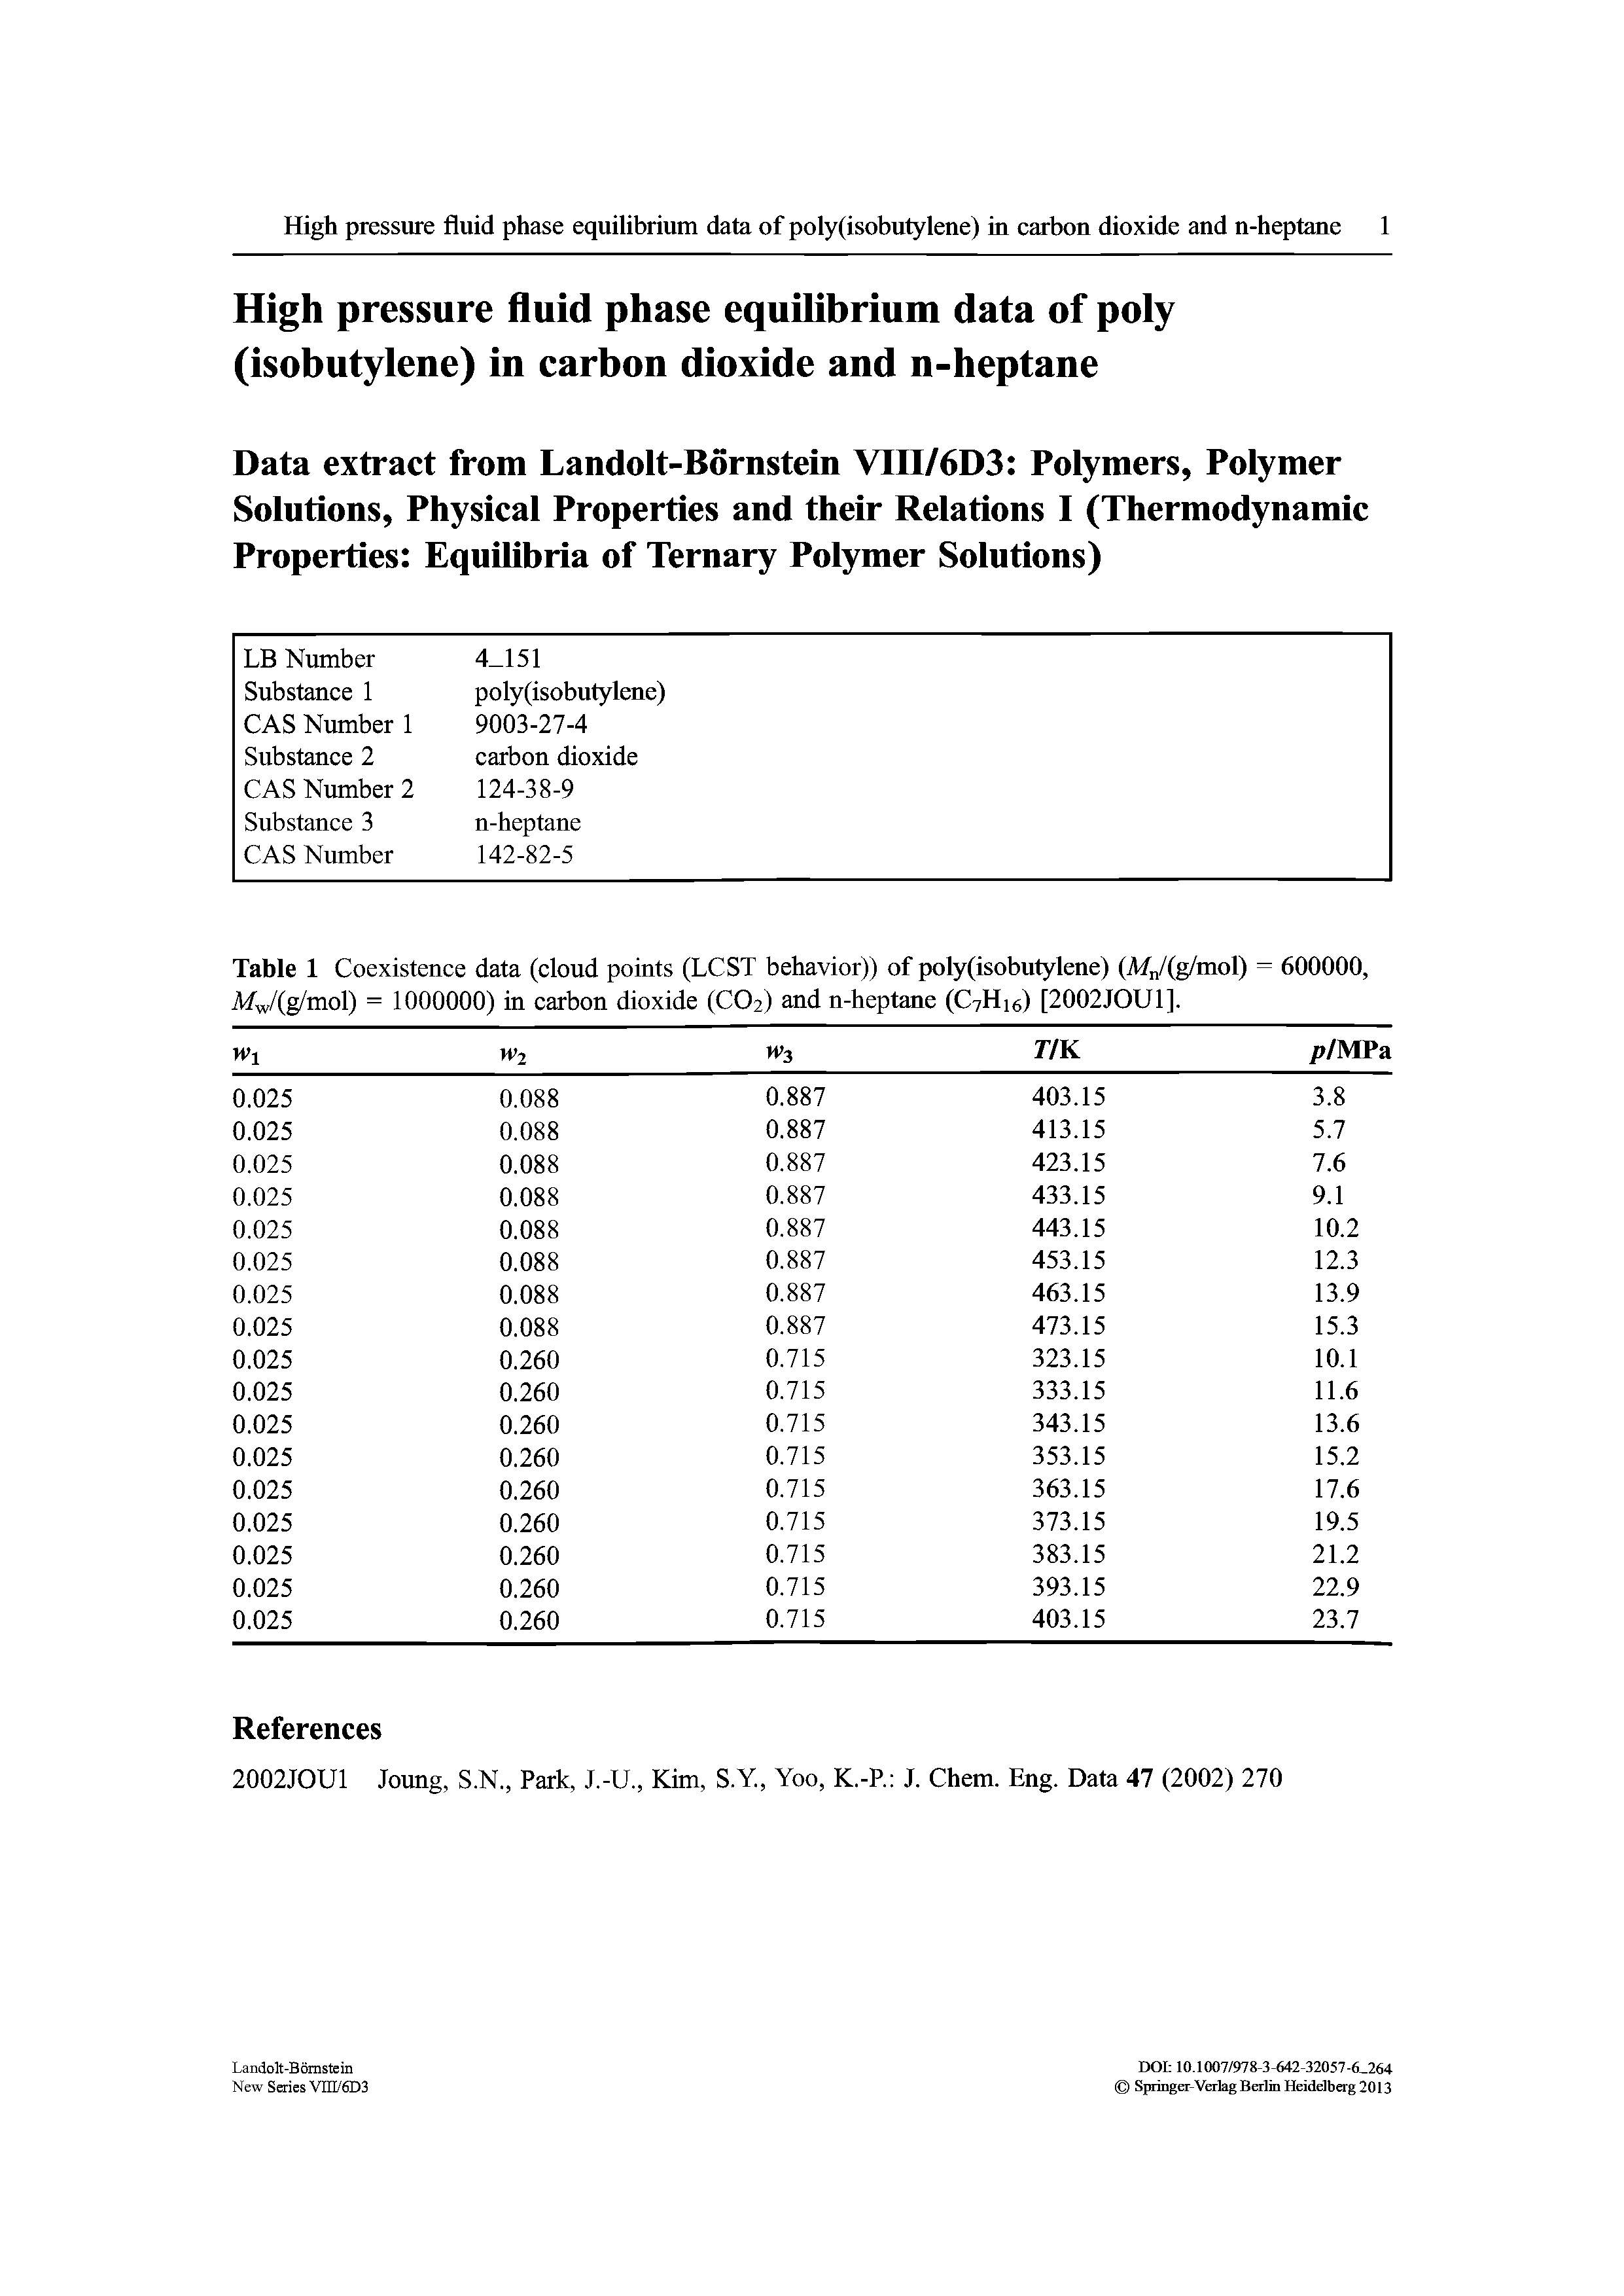 Table 1 Coexistence data (cloud points (LCST behavior)) of poly(isobutylene) (M /(g/mol) Mw/(g/mol) = 1000000) in carbon dioxide (CO2) and n-heptane (C7H16) [2002JOU1]. = 600000,...